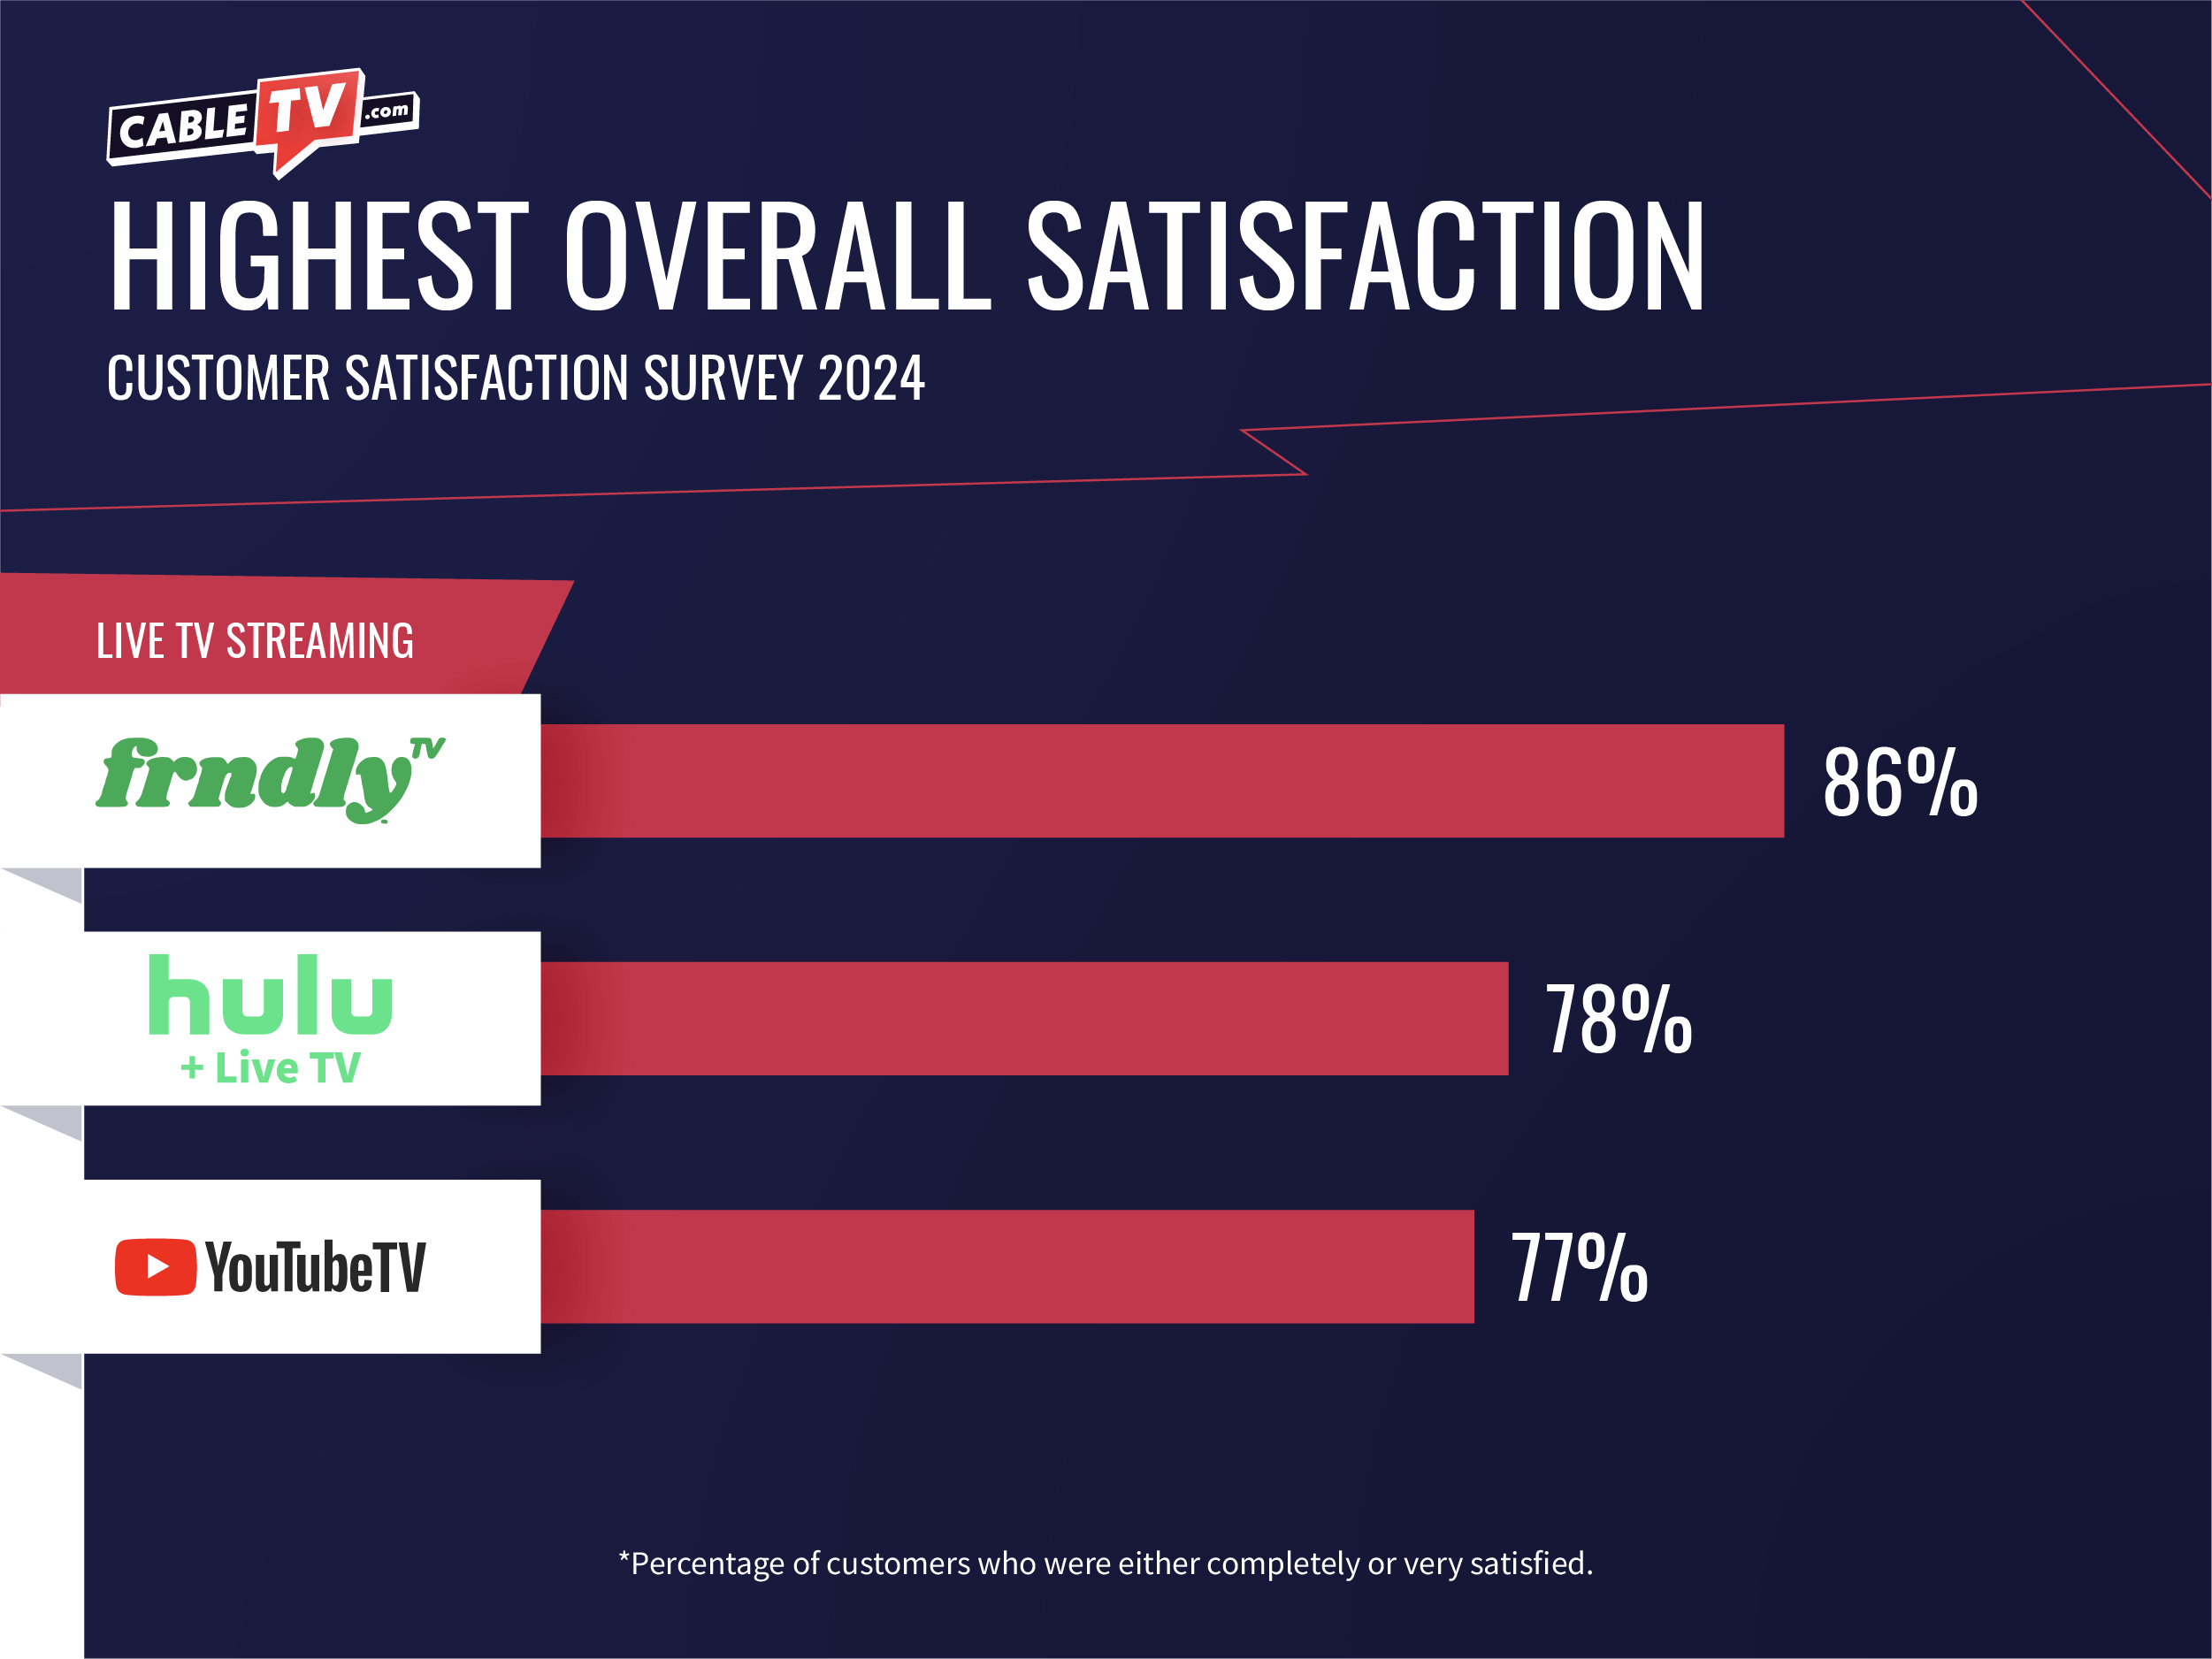 Top spots for overall satisfaction go to Frndly TV, Hulu + Live TV, and YouTube TV